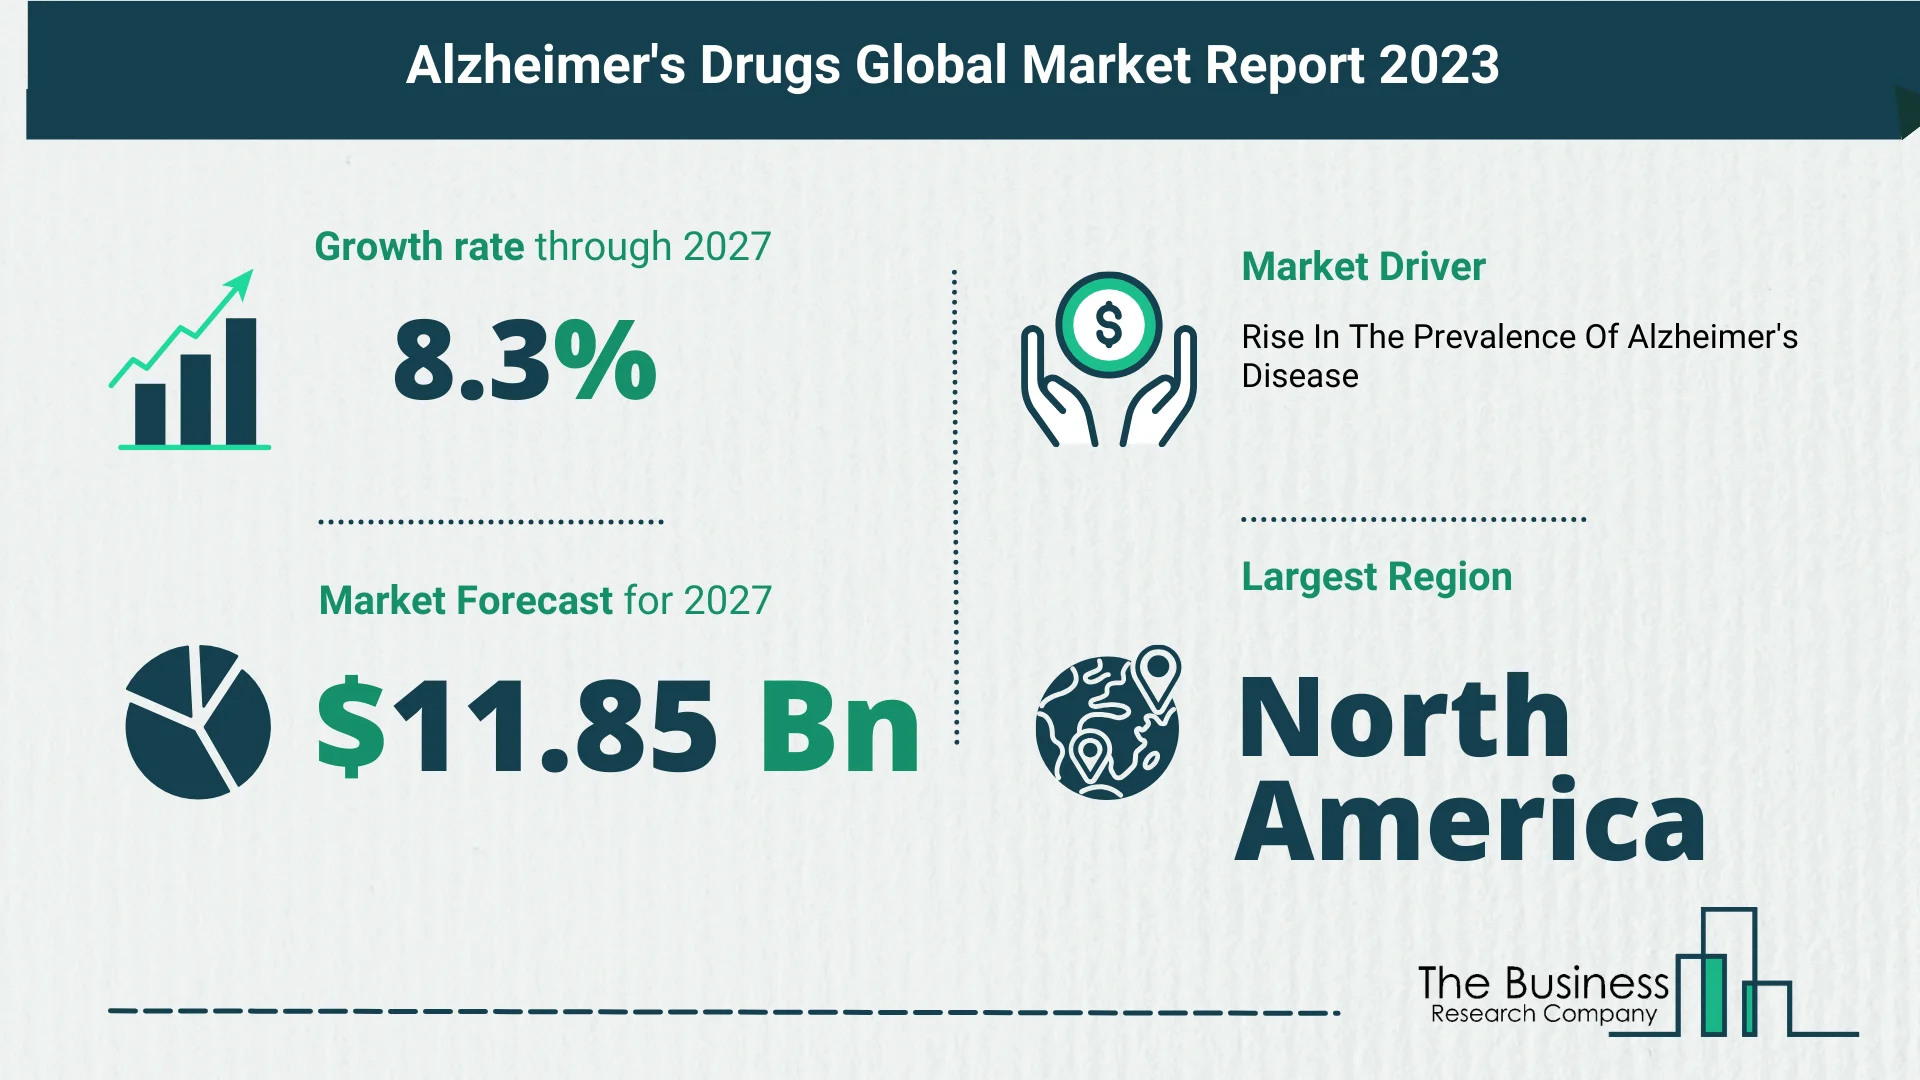 Key Trends And Drivers In The Alzheimers Drugs Market 2023